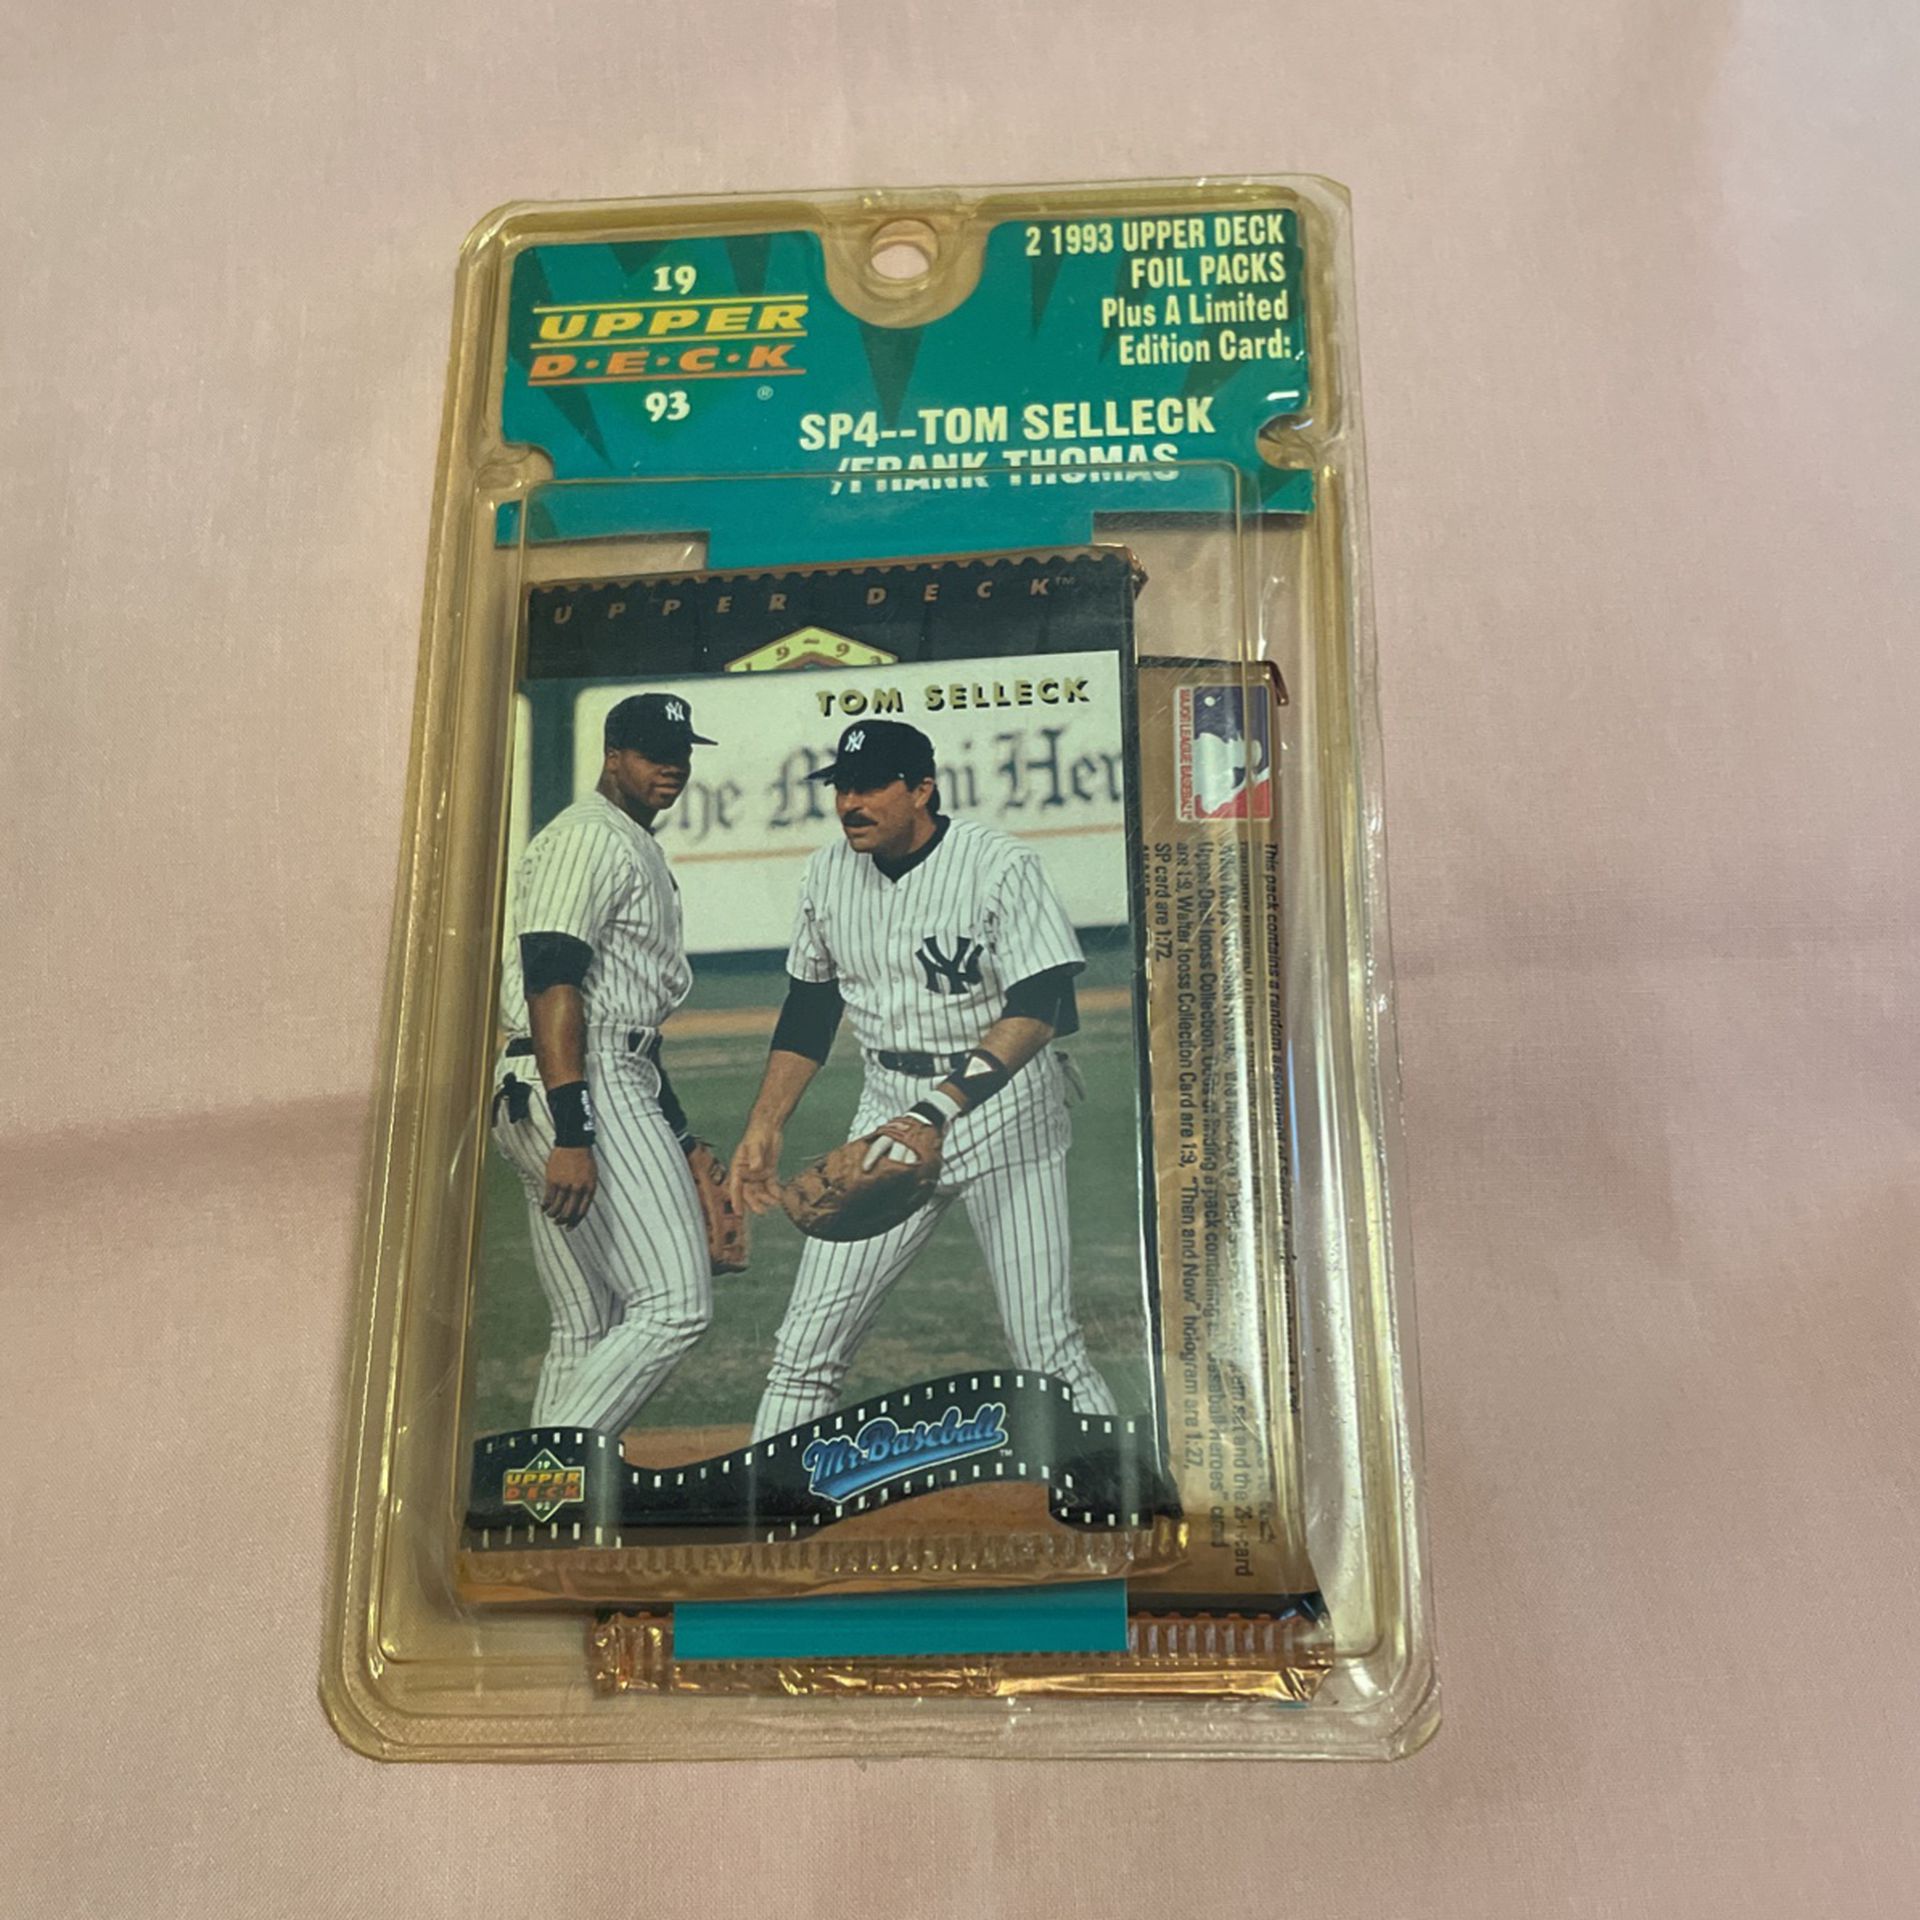 1993 UpperDeck Baseball 2 Packs With SP4 Tom Selleck And